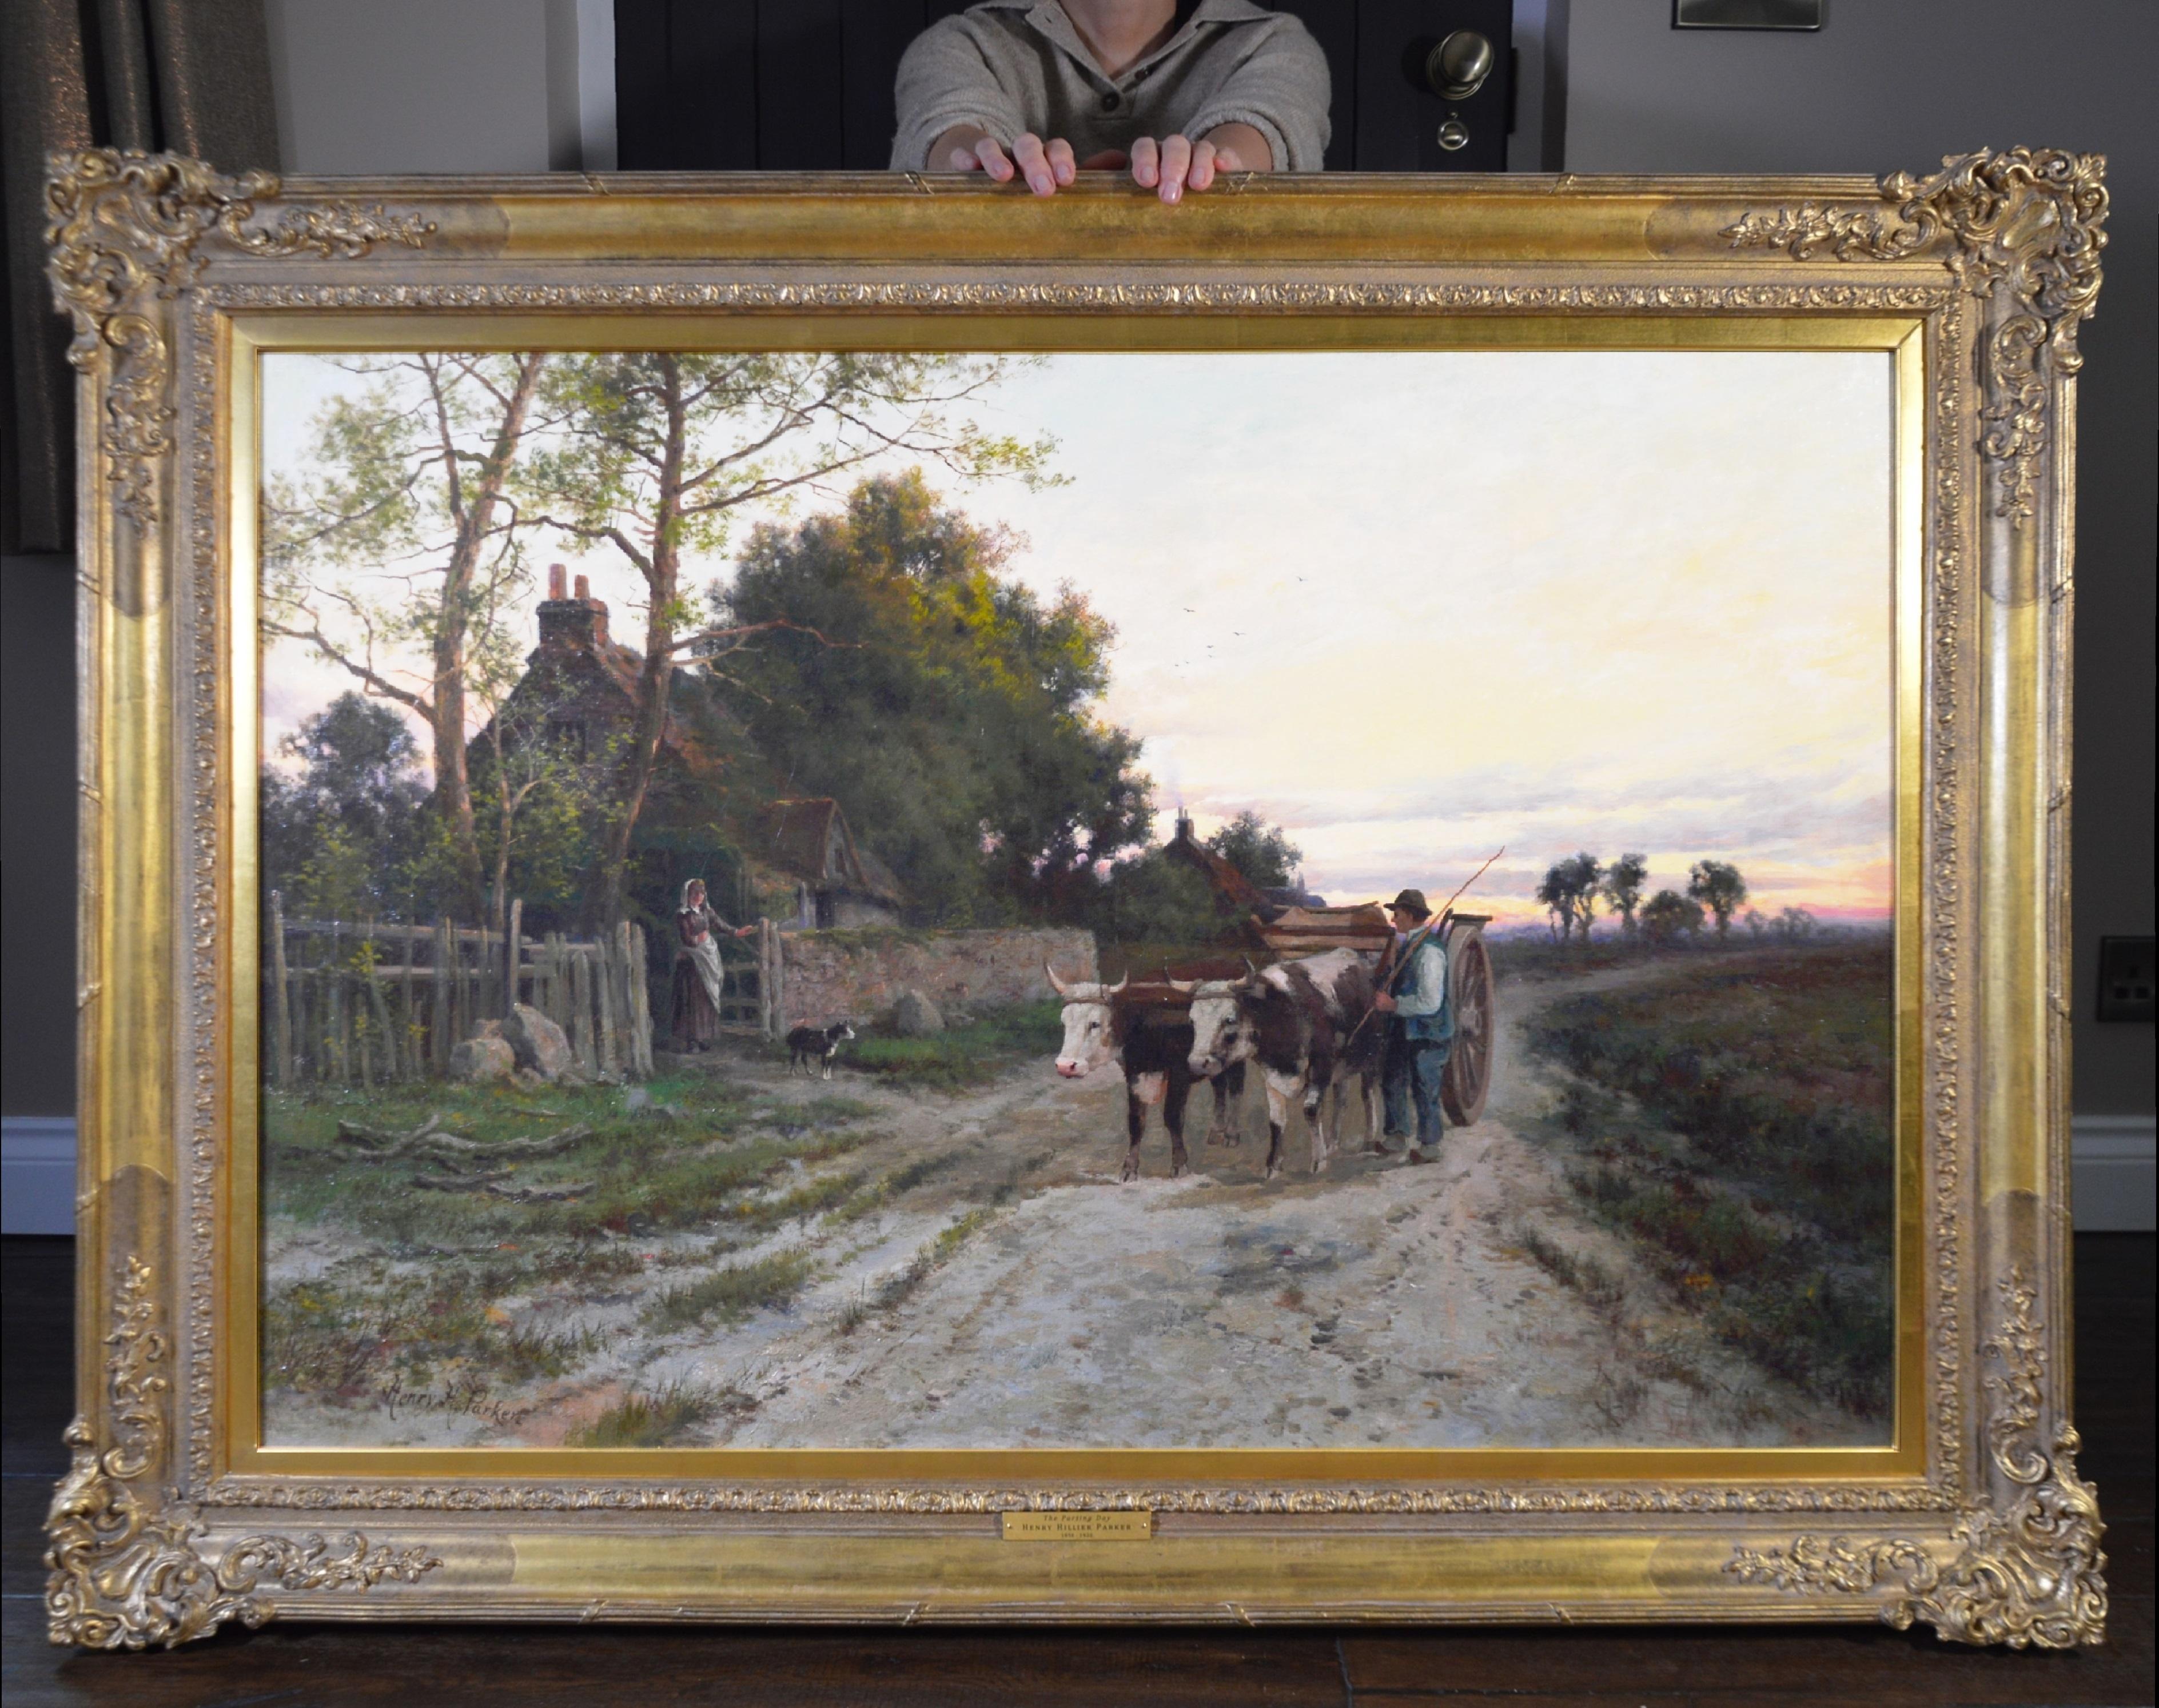 Henry H Parker Animal Painting - The Parting Day - V Large 19th Century English Sunset LandscapeOil Painting  